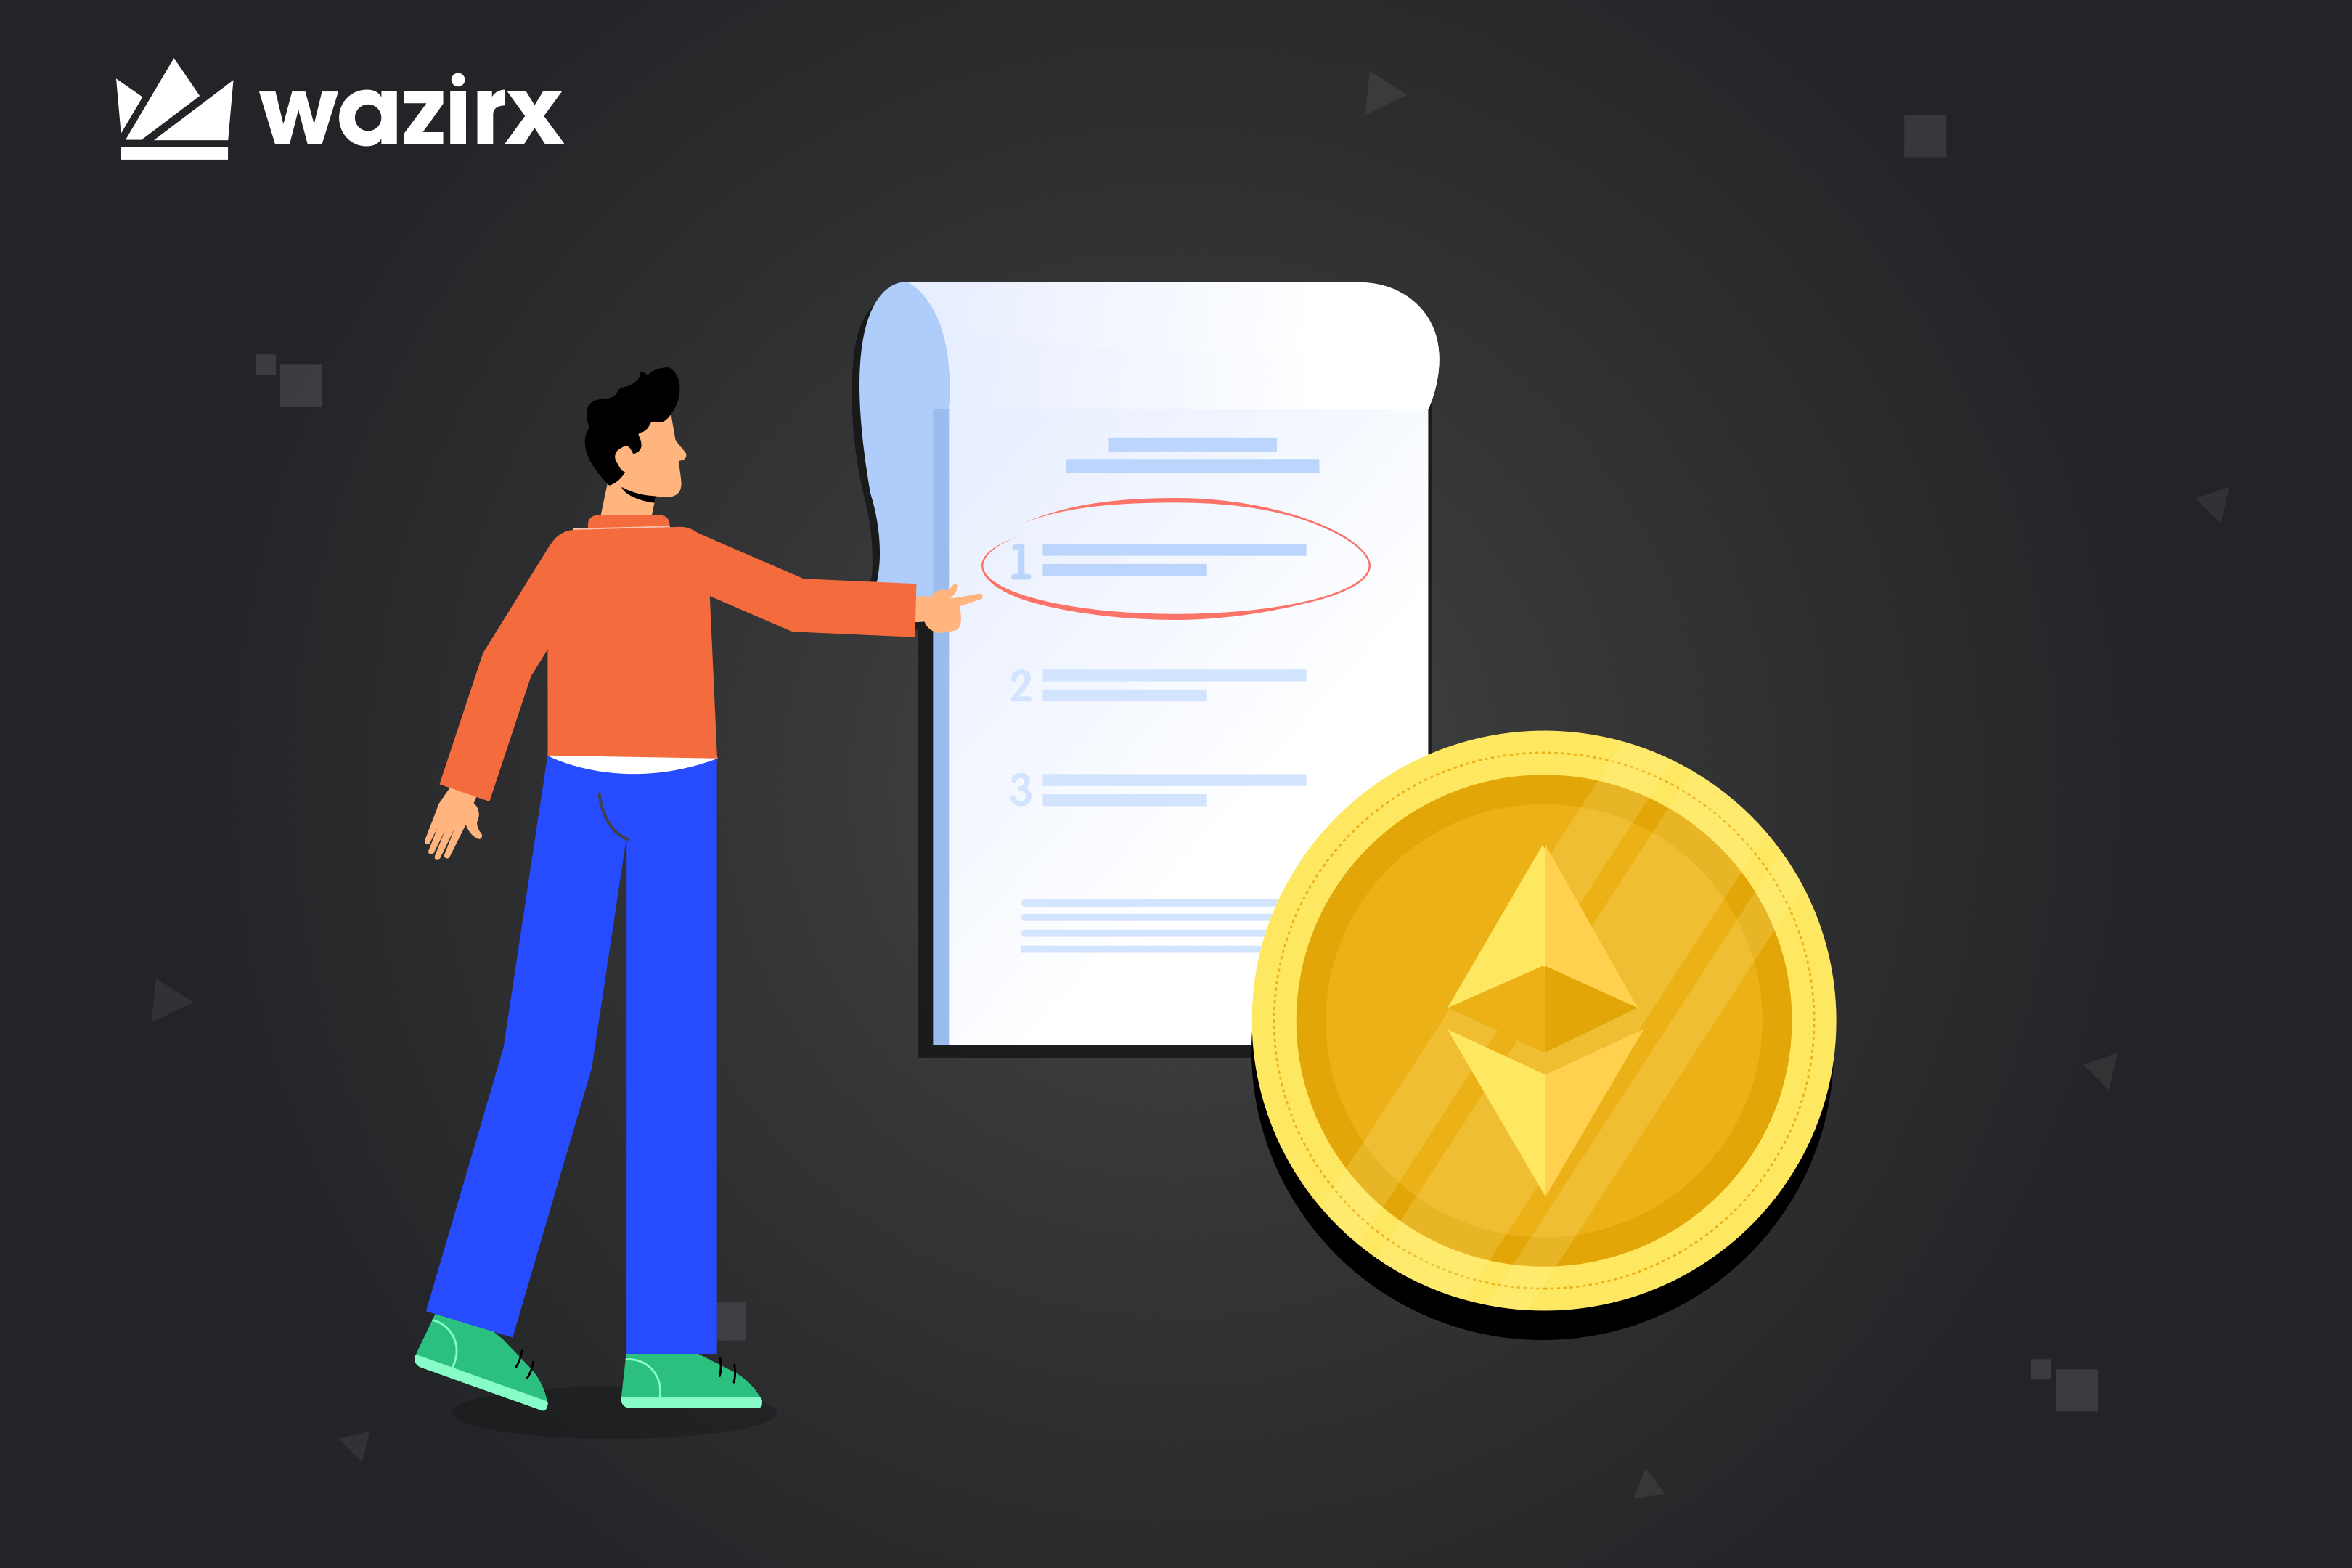 5 Things to keep in mind while buying or selling Ethereum - WazirX